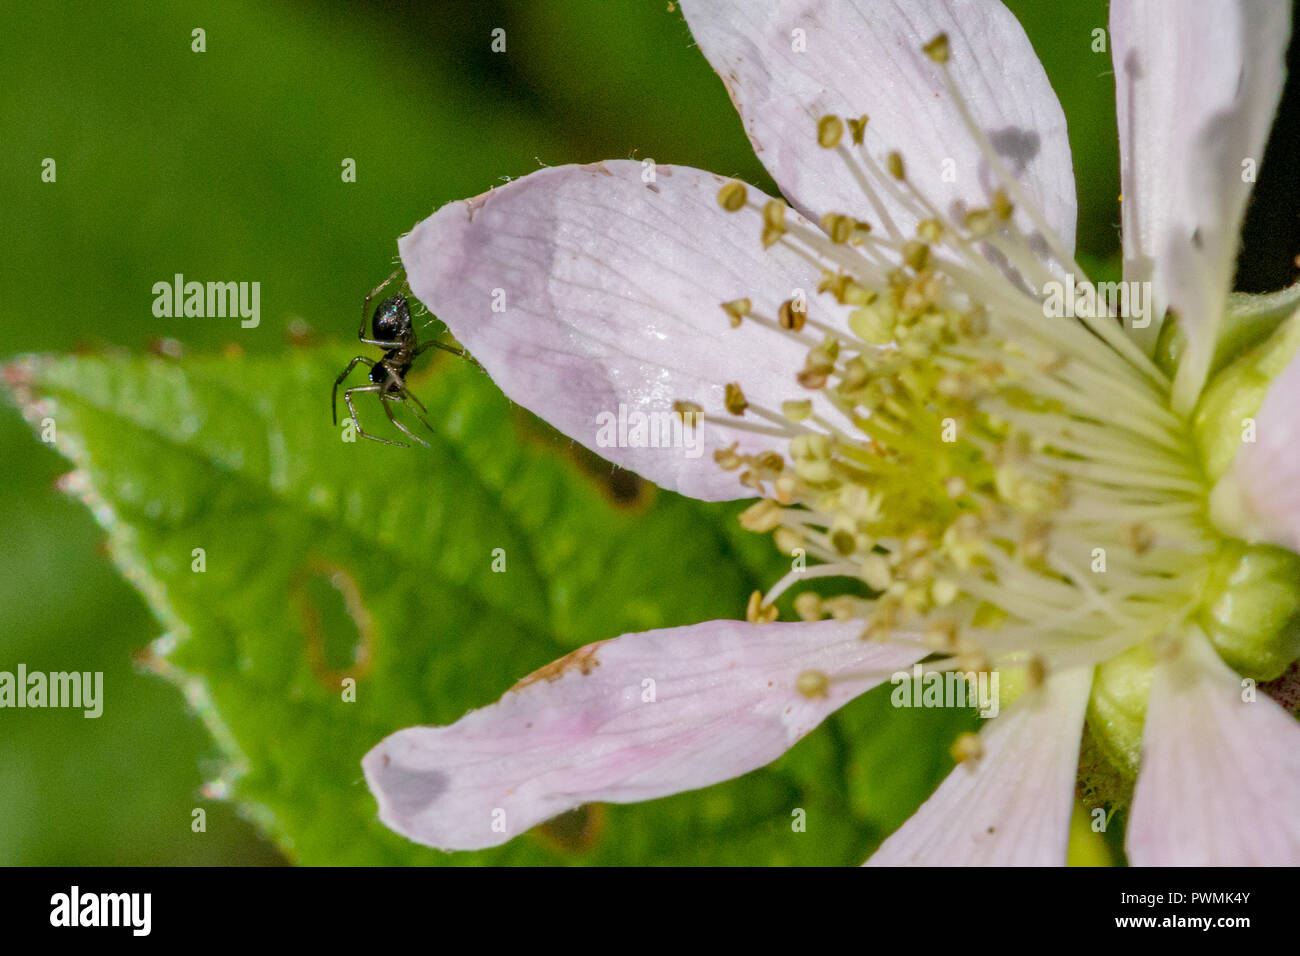 Small black spider hanging on the edge of a California Blackberry flower petal with blurred background Stock Photo